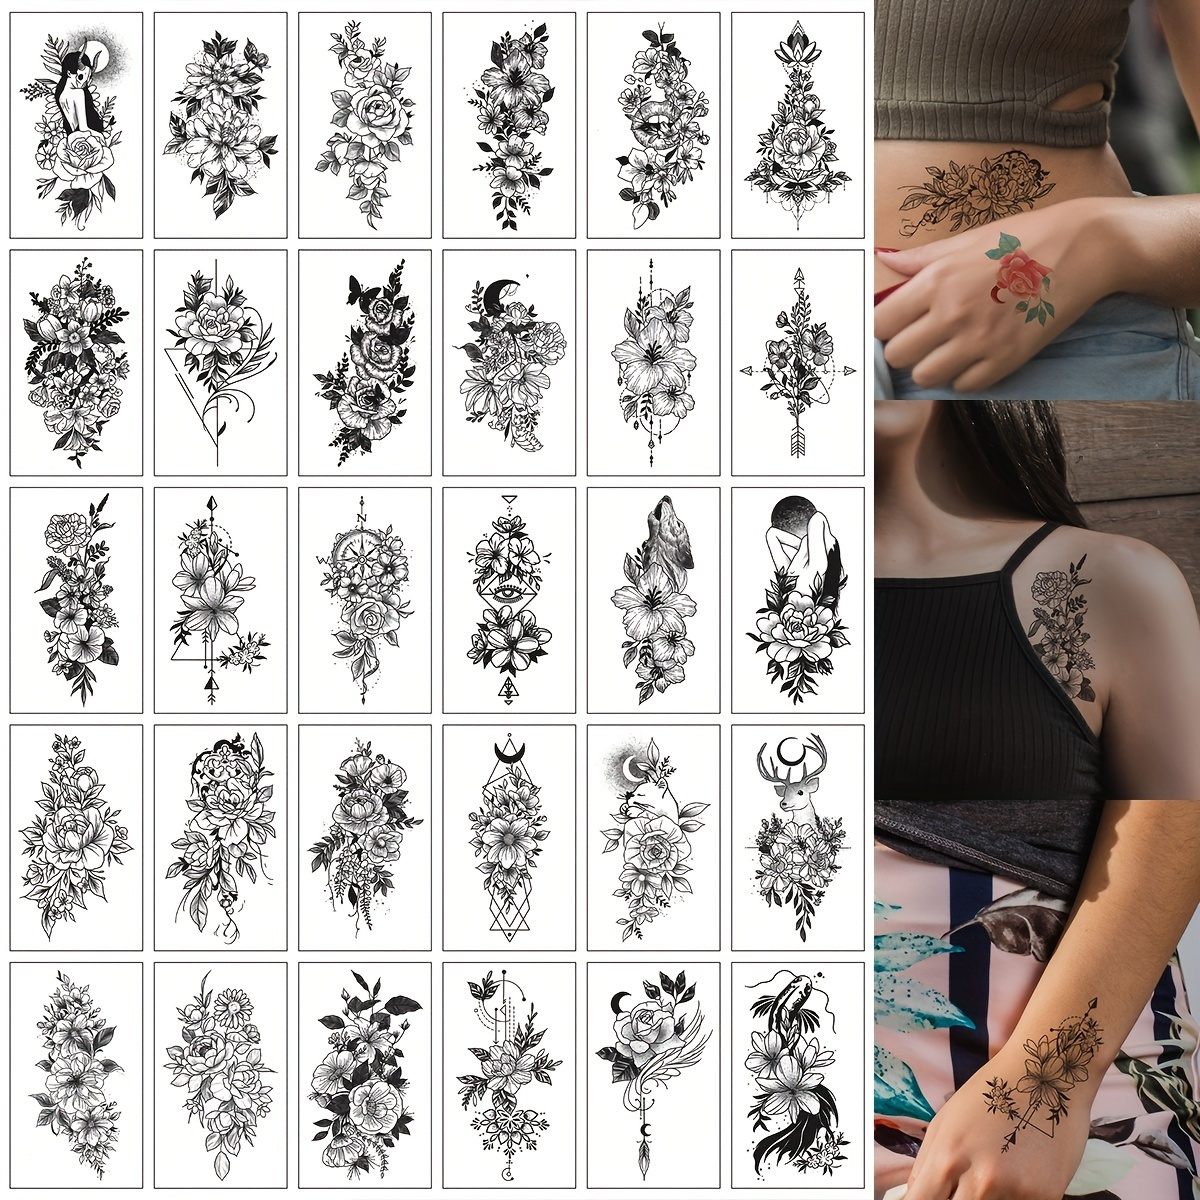 

30pcs Waterproof Black Line Drawing Flowers Temporary Tattoo Stickers For Women And Girls - Lasts 3-7 Days - Perfect For Body, Arm, And Shoulder Art